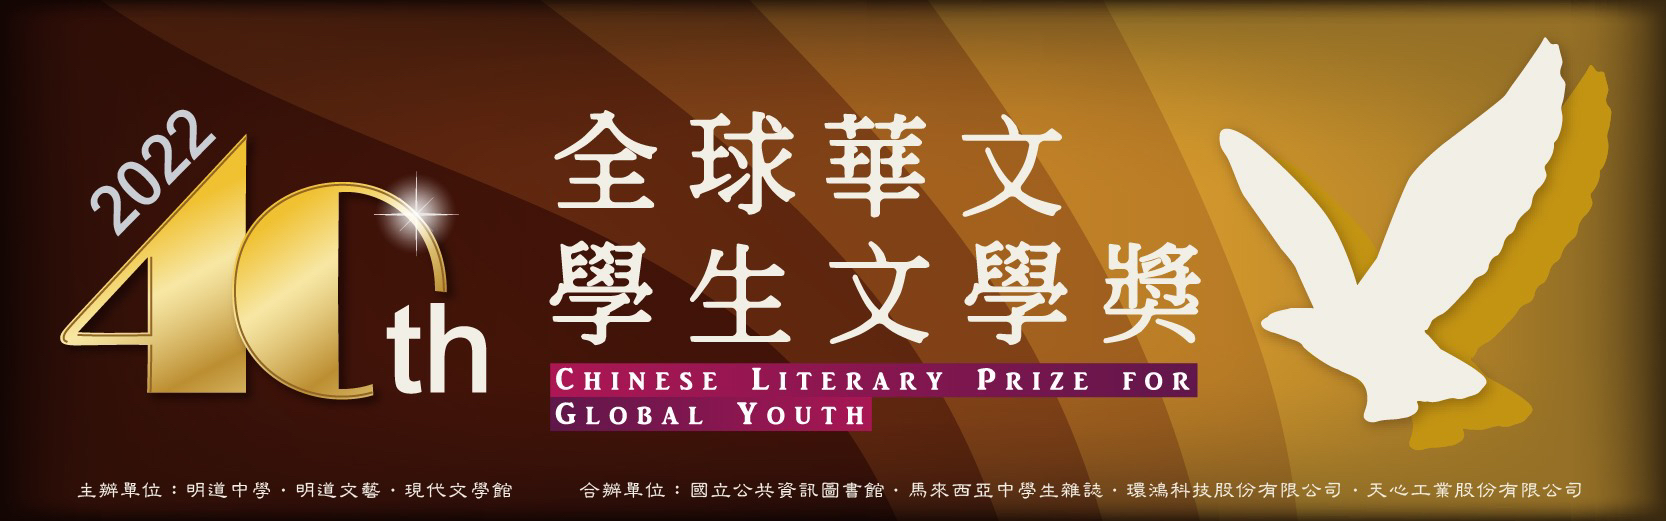 USI Supports the 40th Chinese Literary Prize for Global Youth to Inherit Chinese Literature